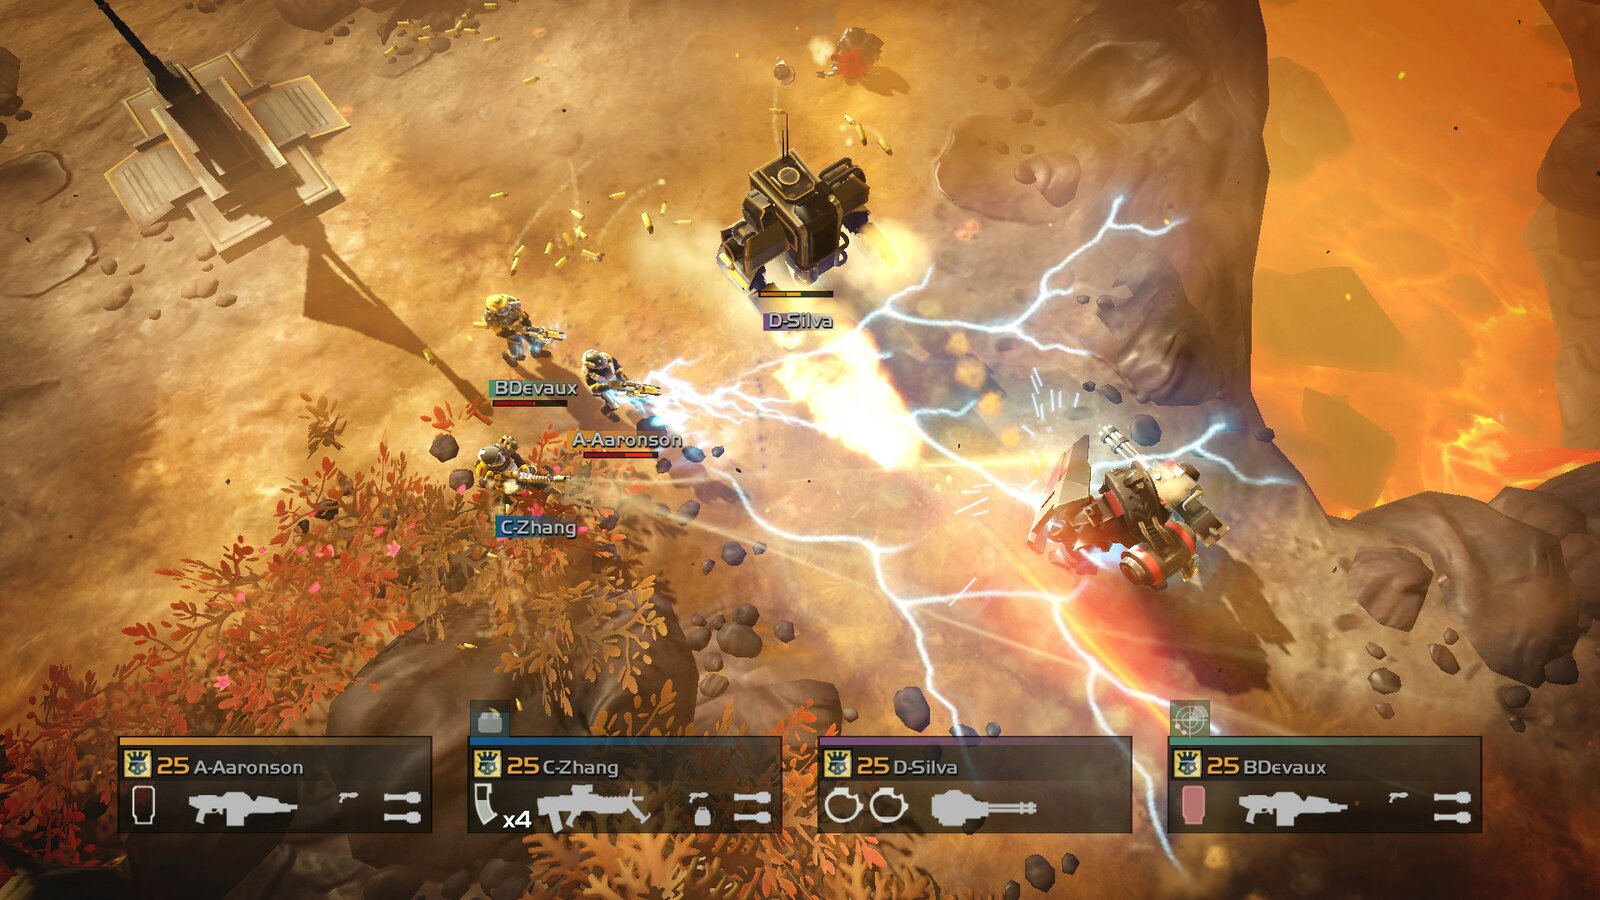 HELLDIVERS - Digital Deluxe Edition